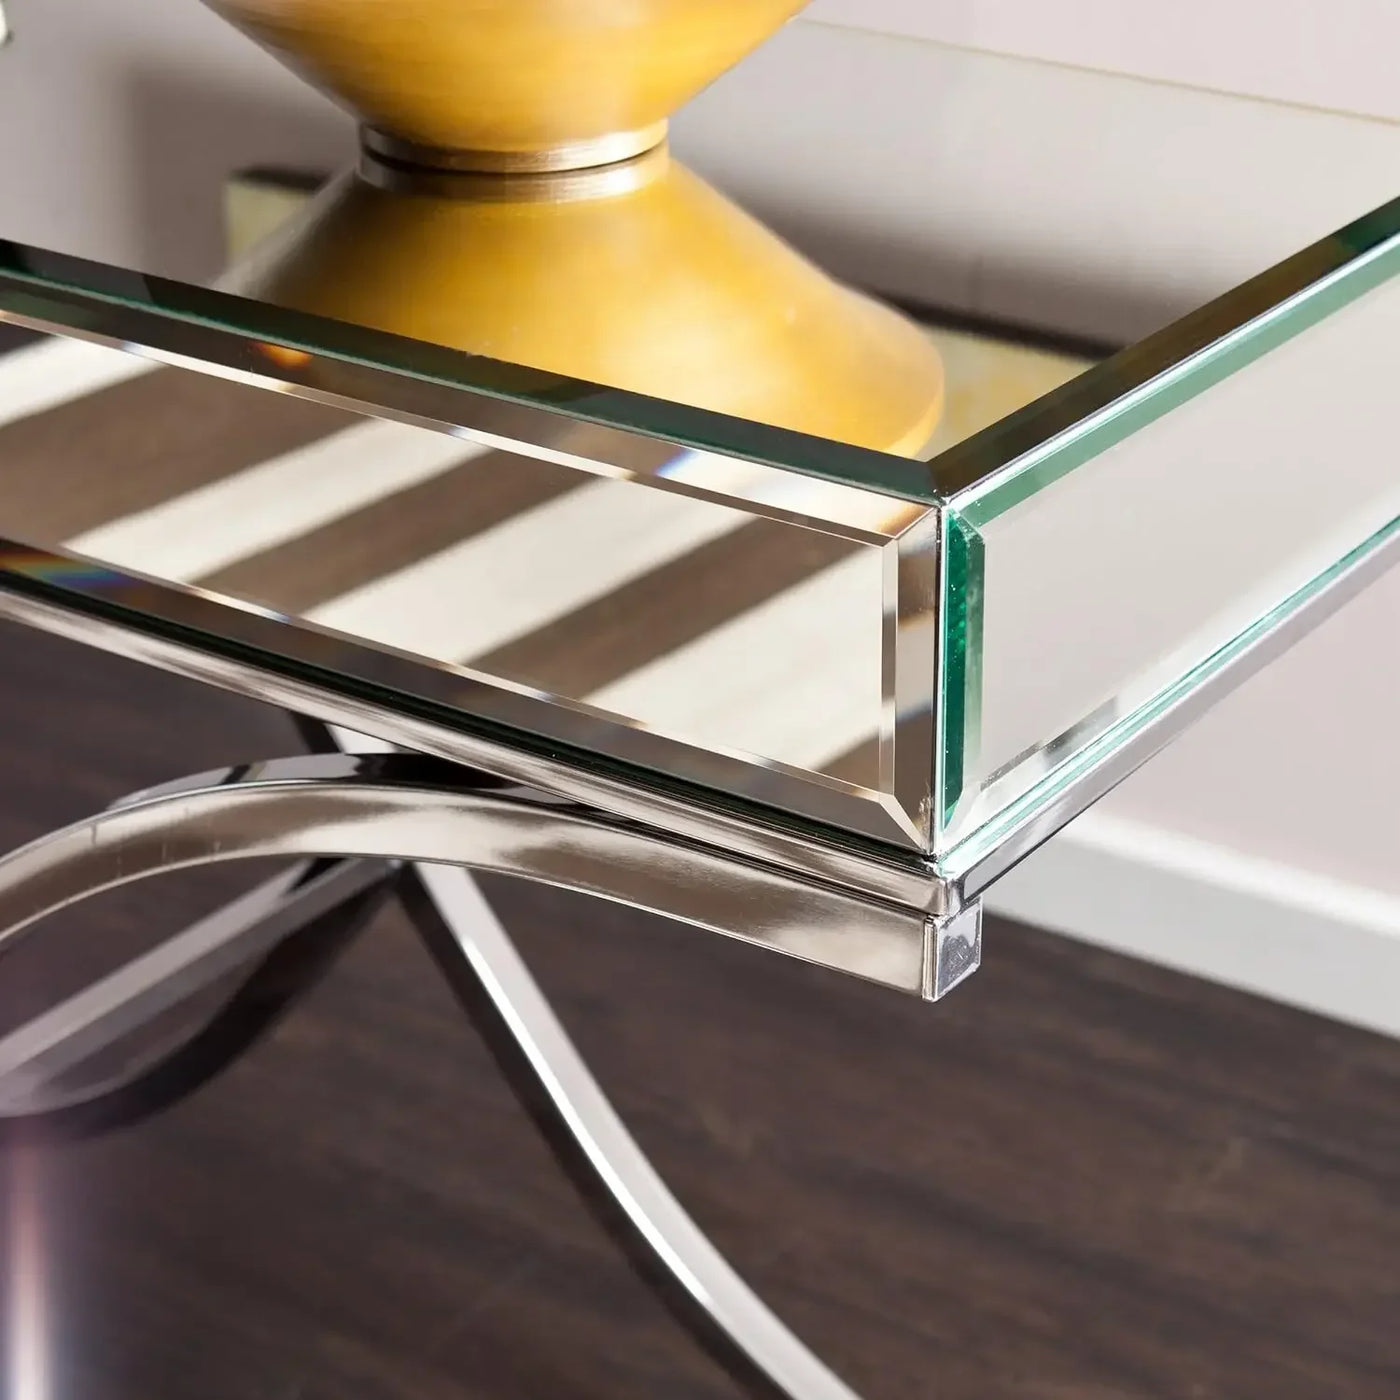 Lenards Accent Console Table | Mirrored Chrome X Shaped Hallway EntryWay Table